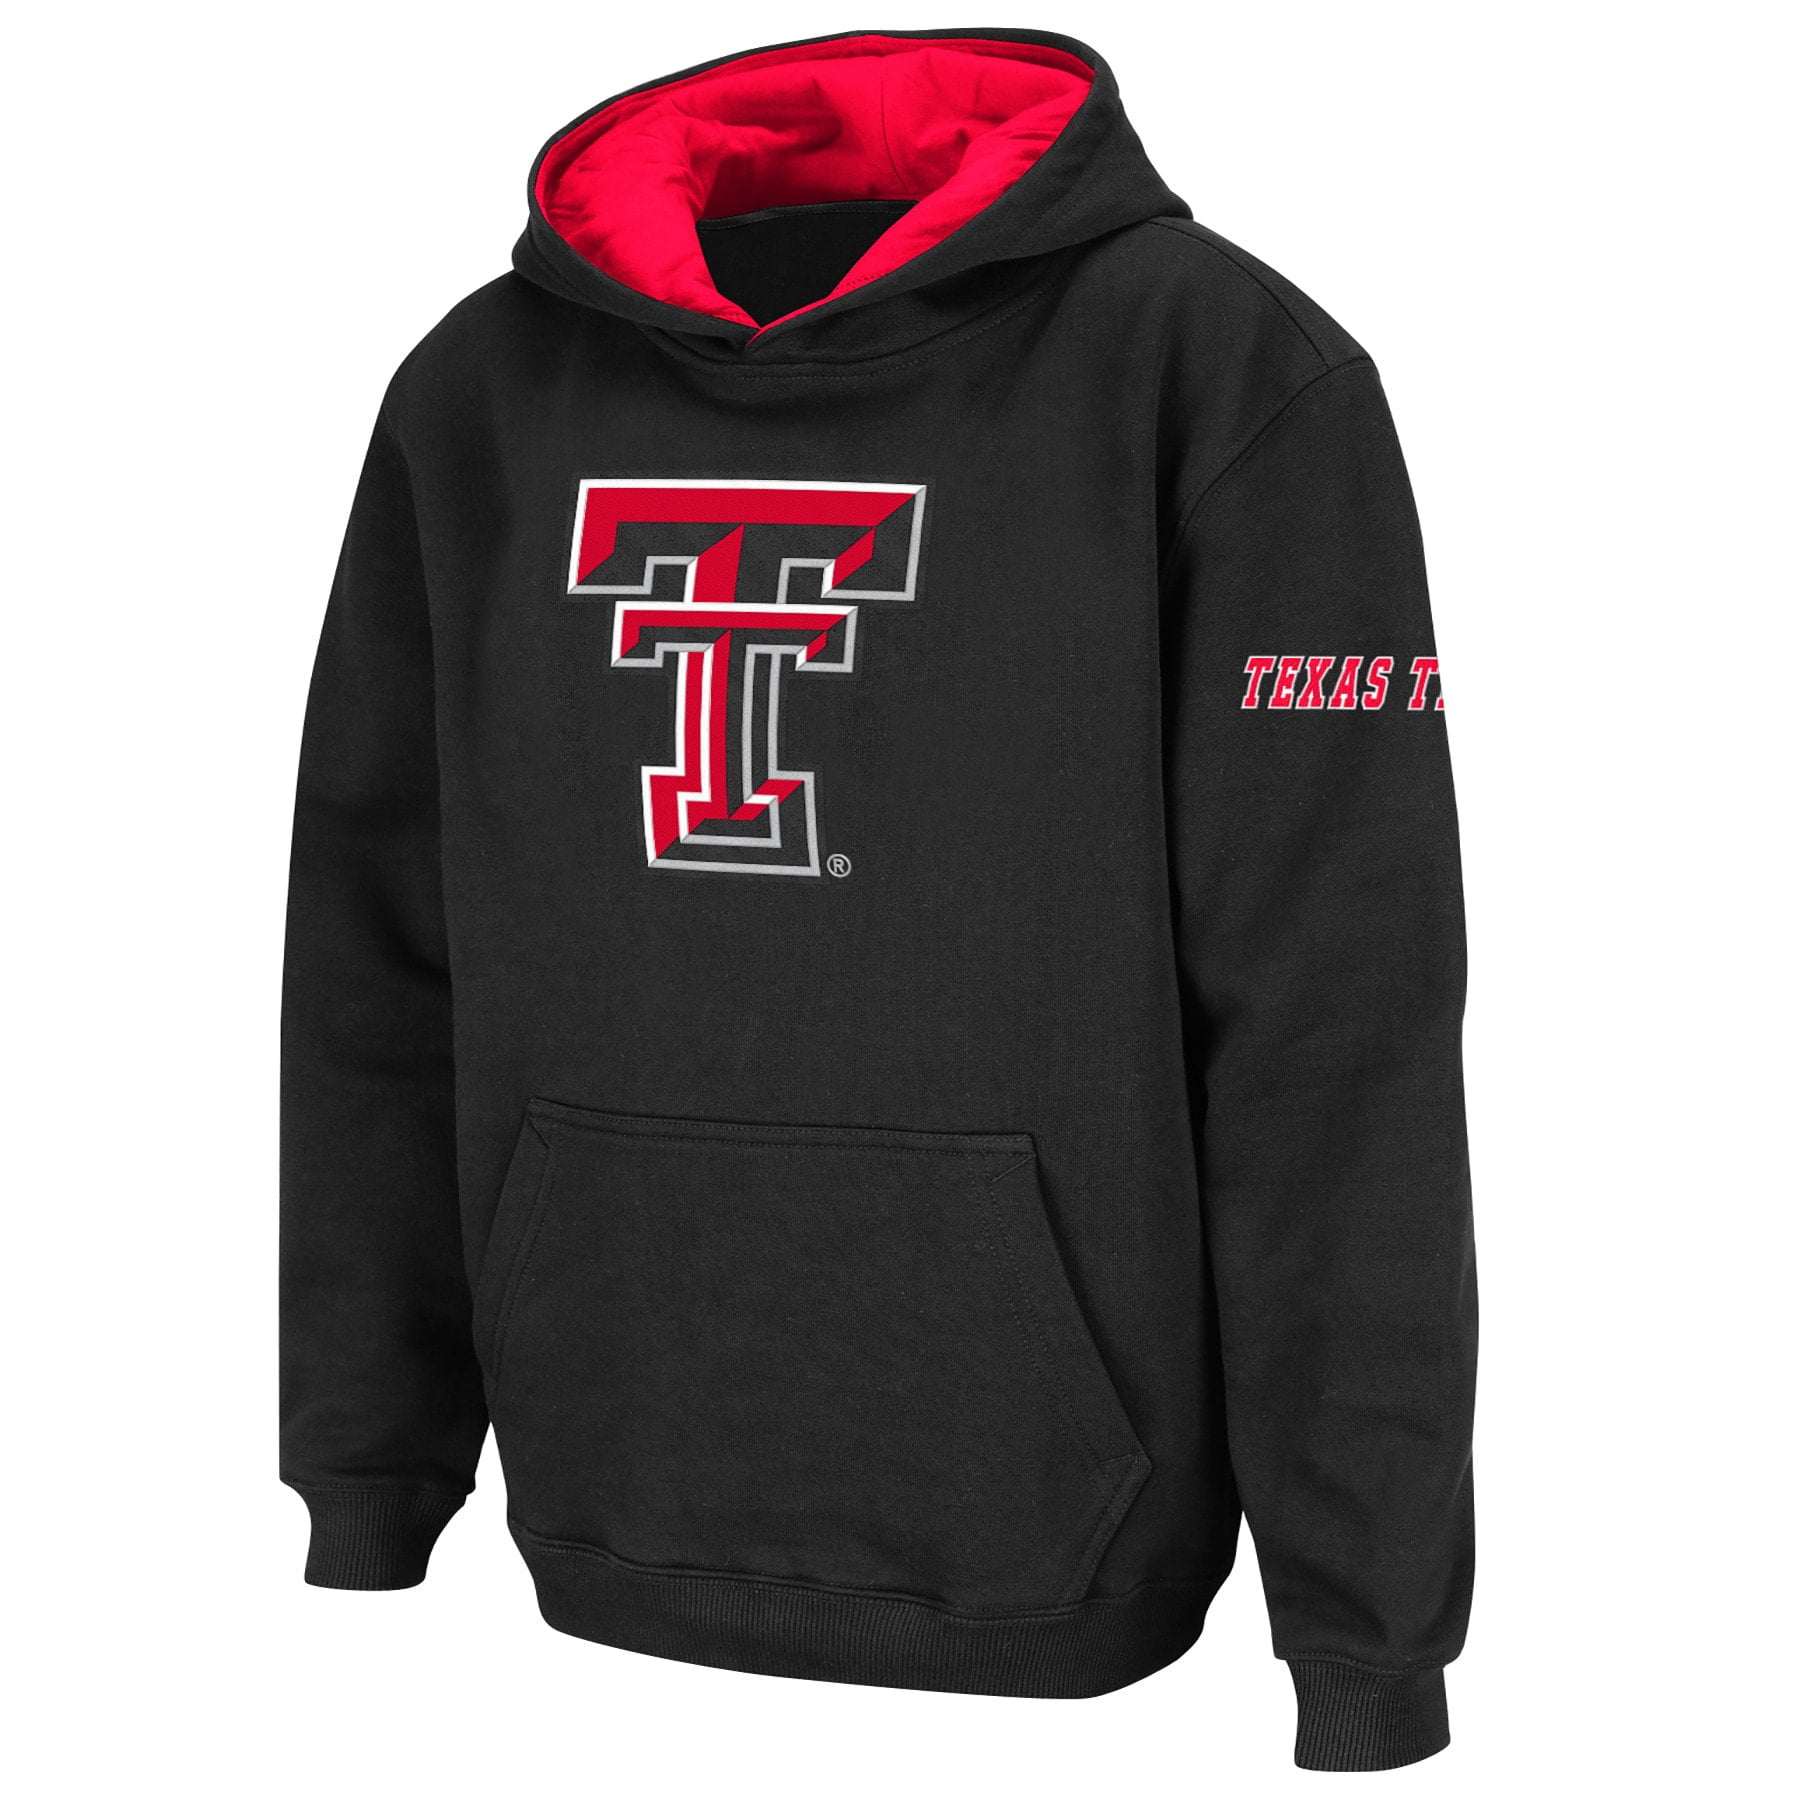 Texas Tech University Official Raiders Logo Unisex Adult Pull-Over Hoodie 